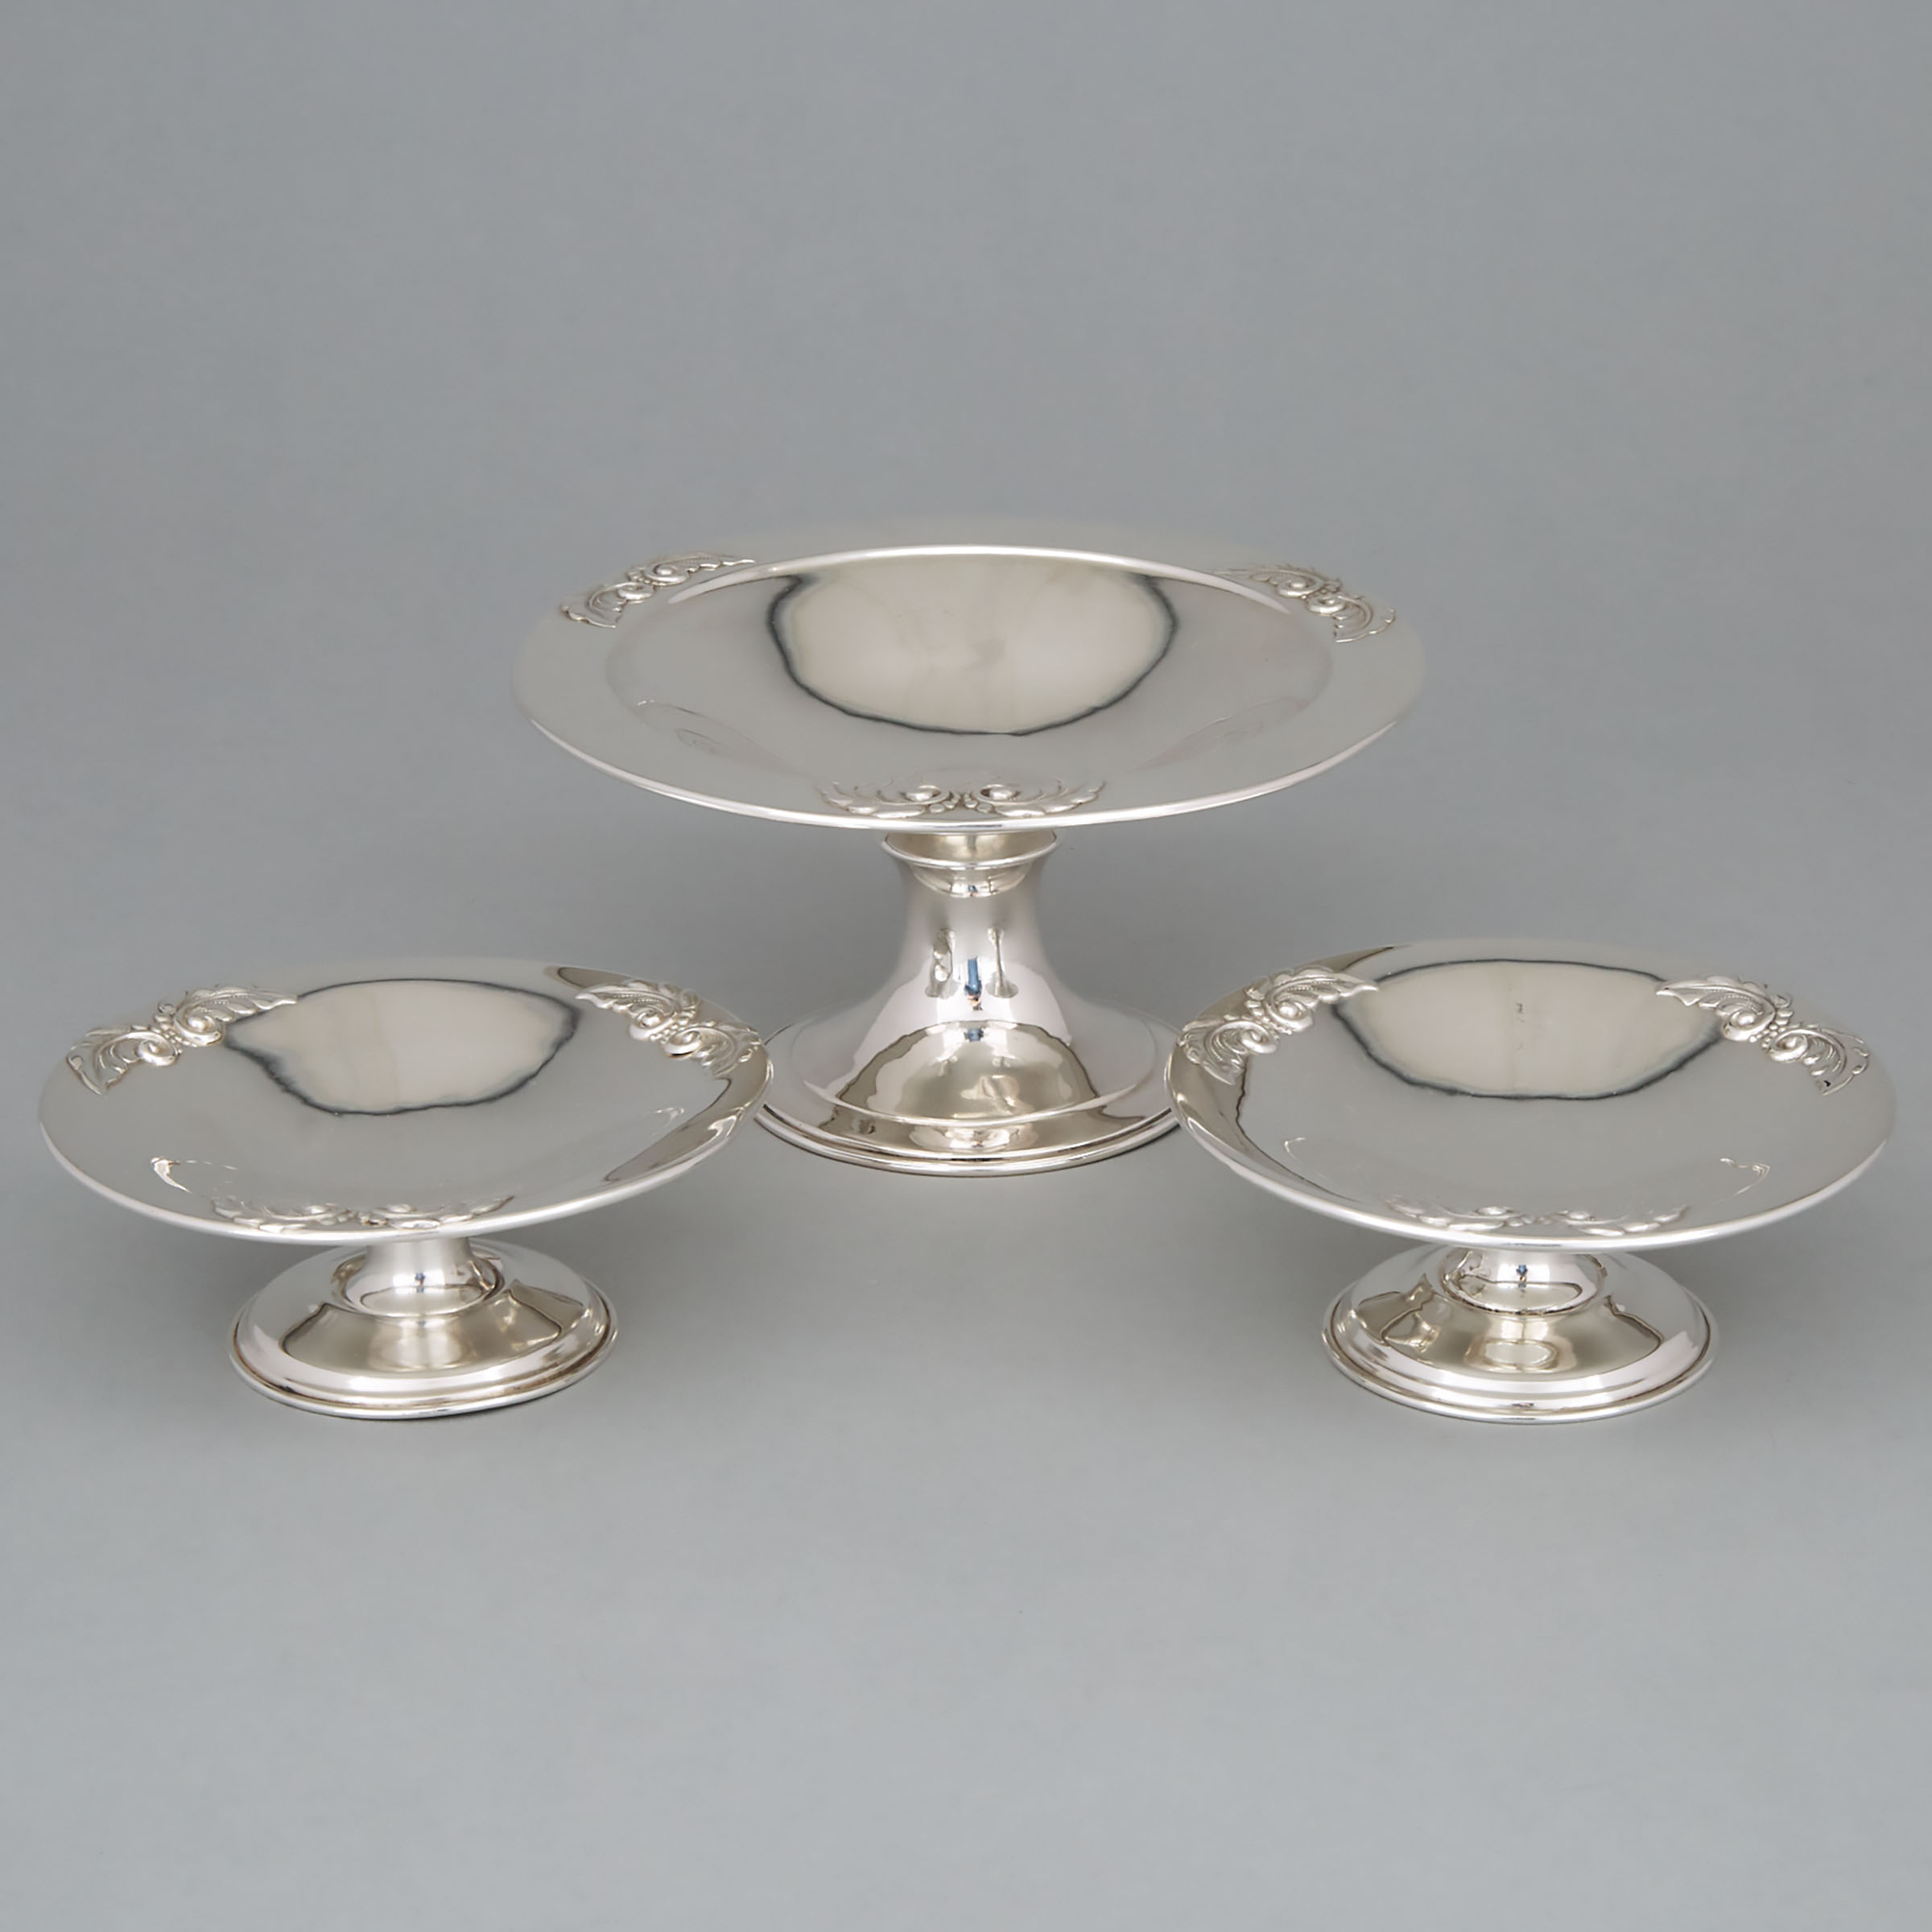 Set of Three Canadian Silver Pedestal-Footed Comports, Poul Petersen, Montreal, Que., mid-20th century